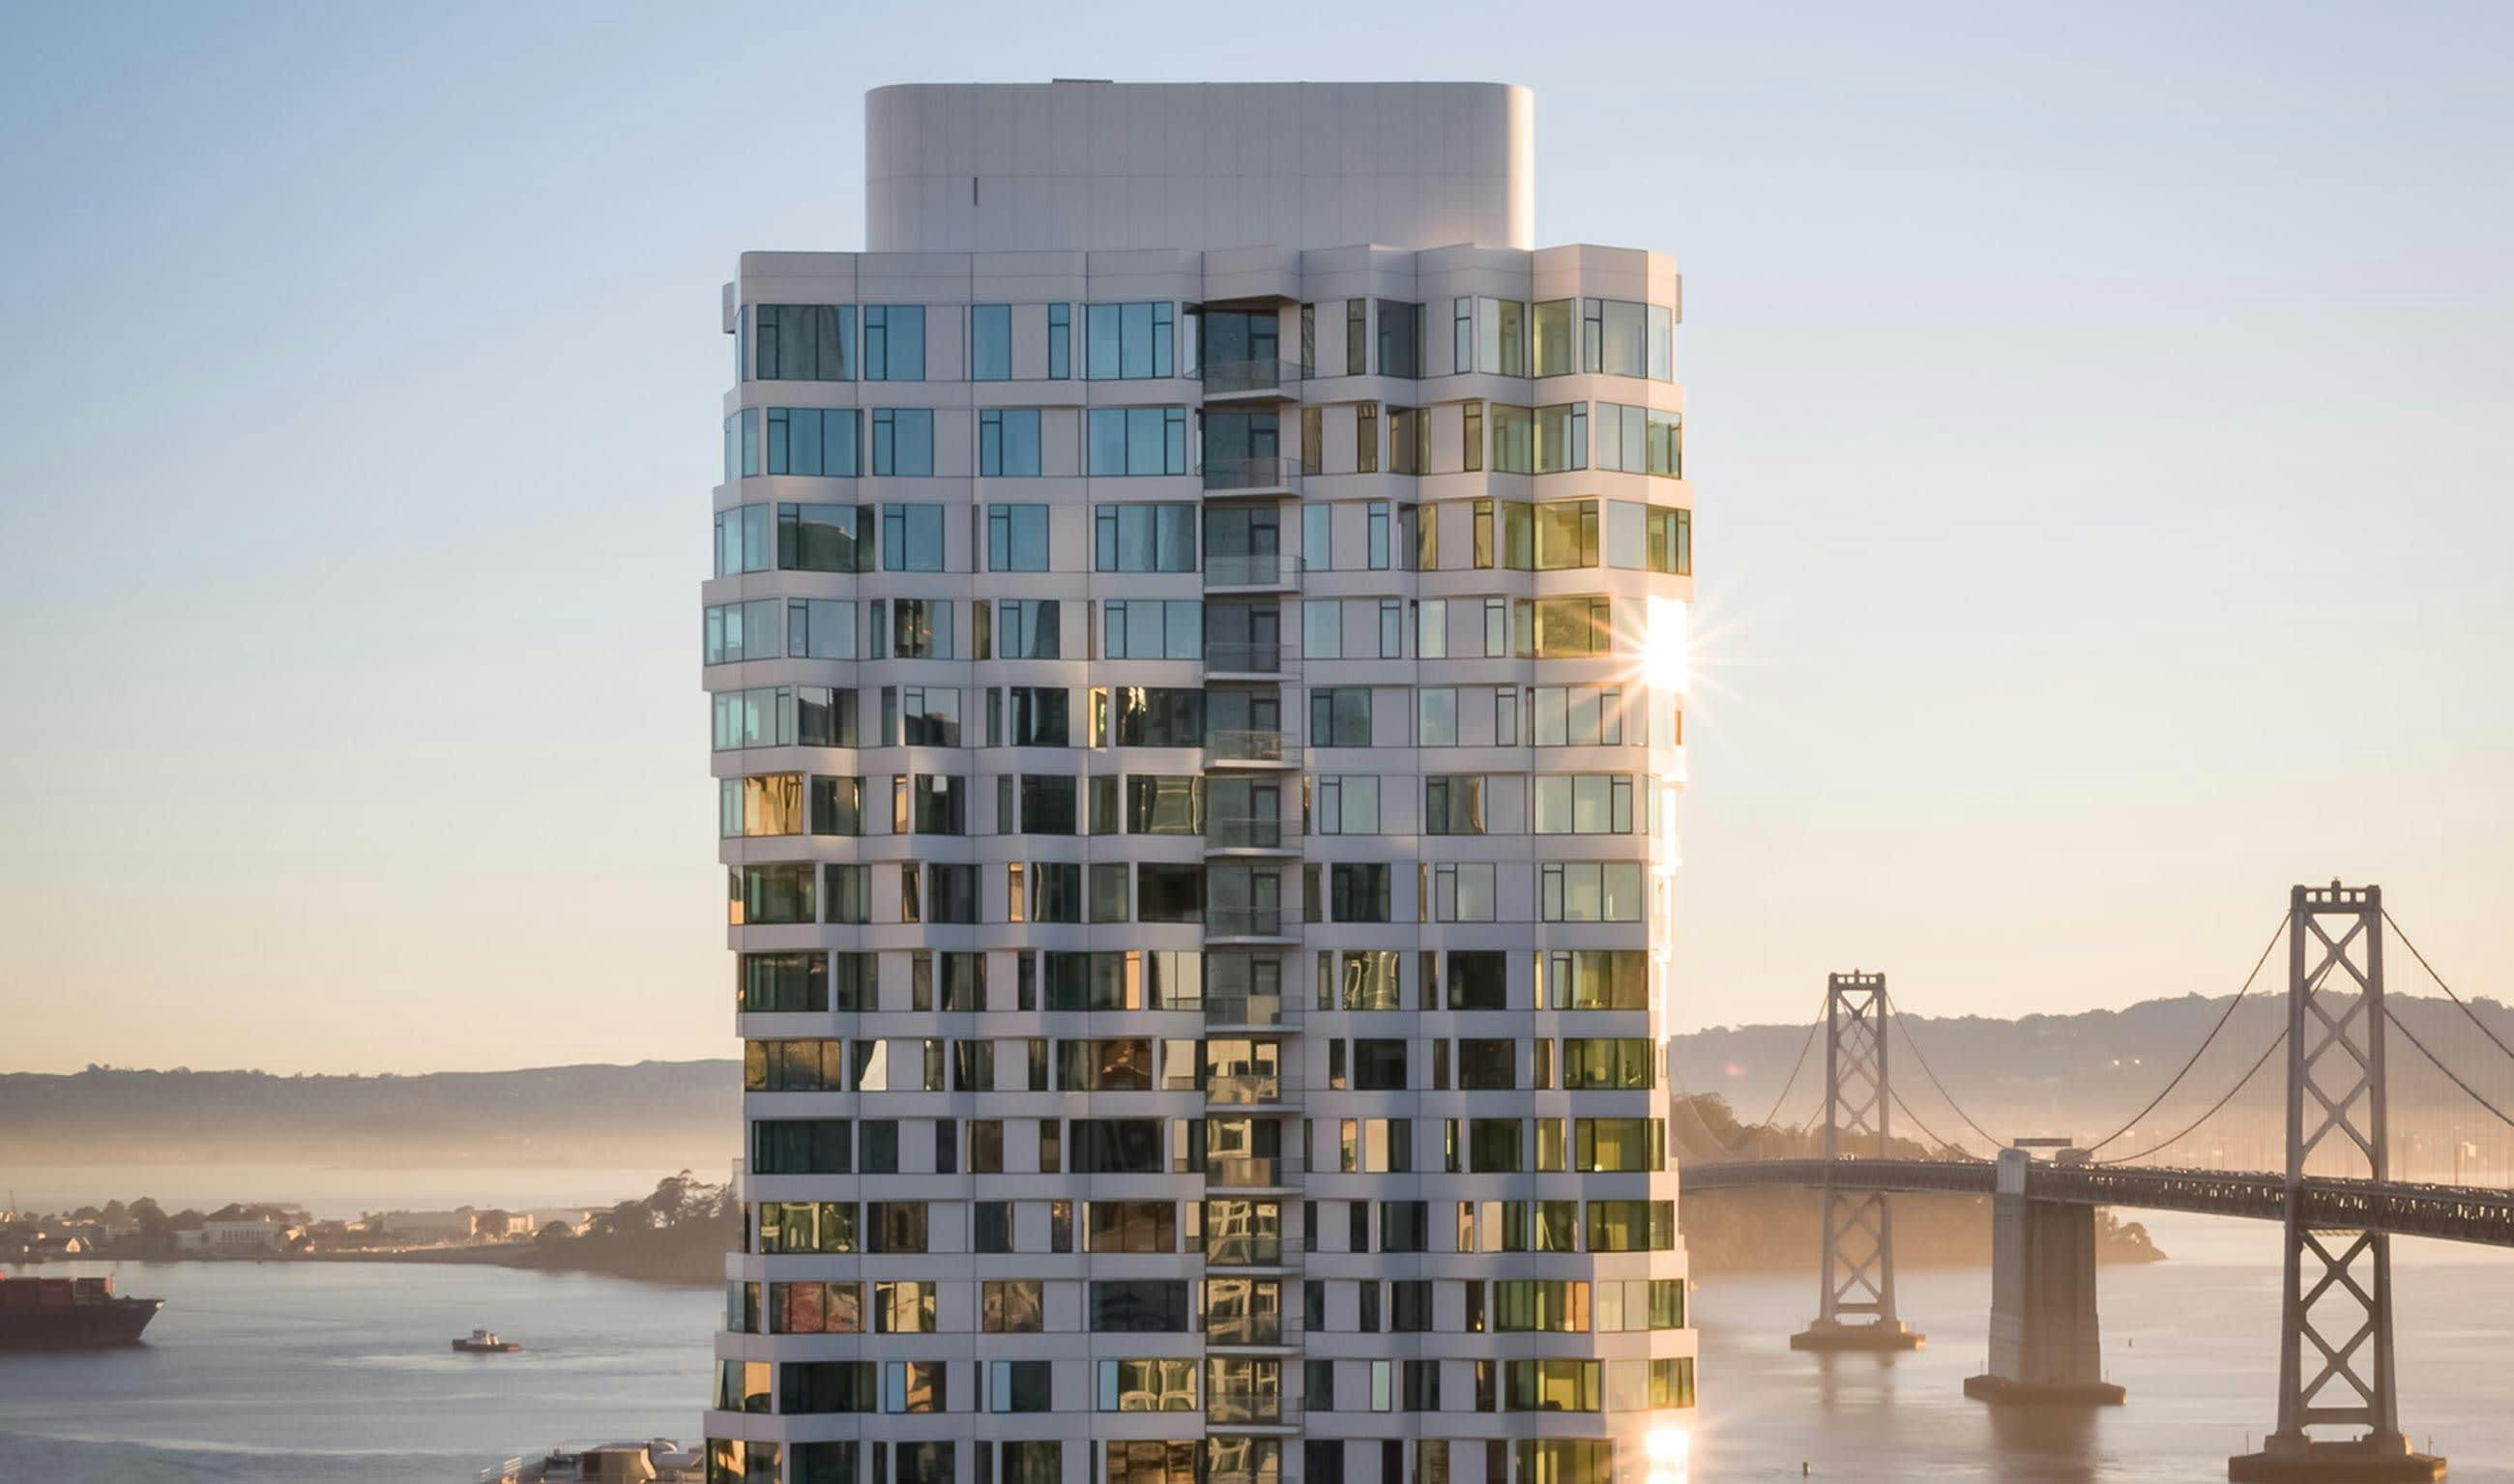 MIRA Tower is an architects dream that utilizes its design to the fullest by providing breathtaking views around the entire structure. It stands tall above the bay with its contemporary design and appearance. Photo courtesy of the MIRA website. 